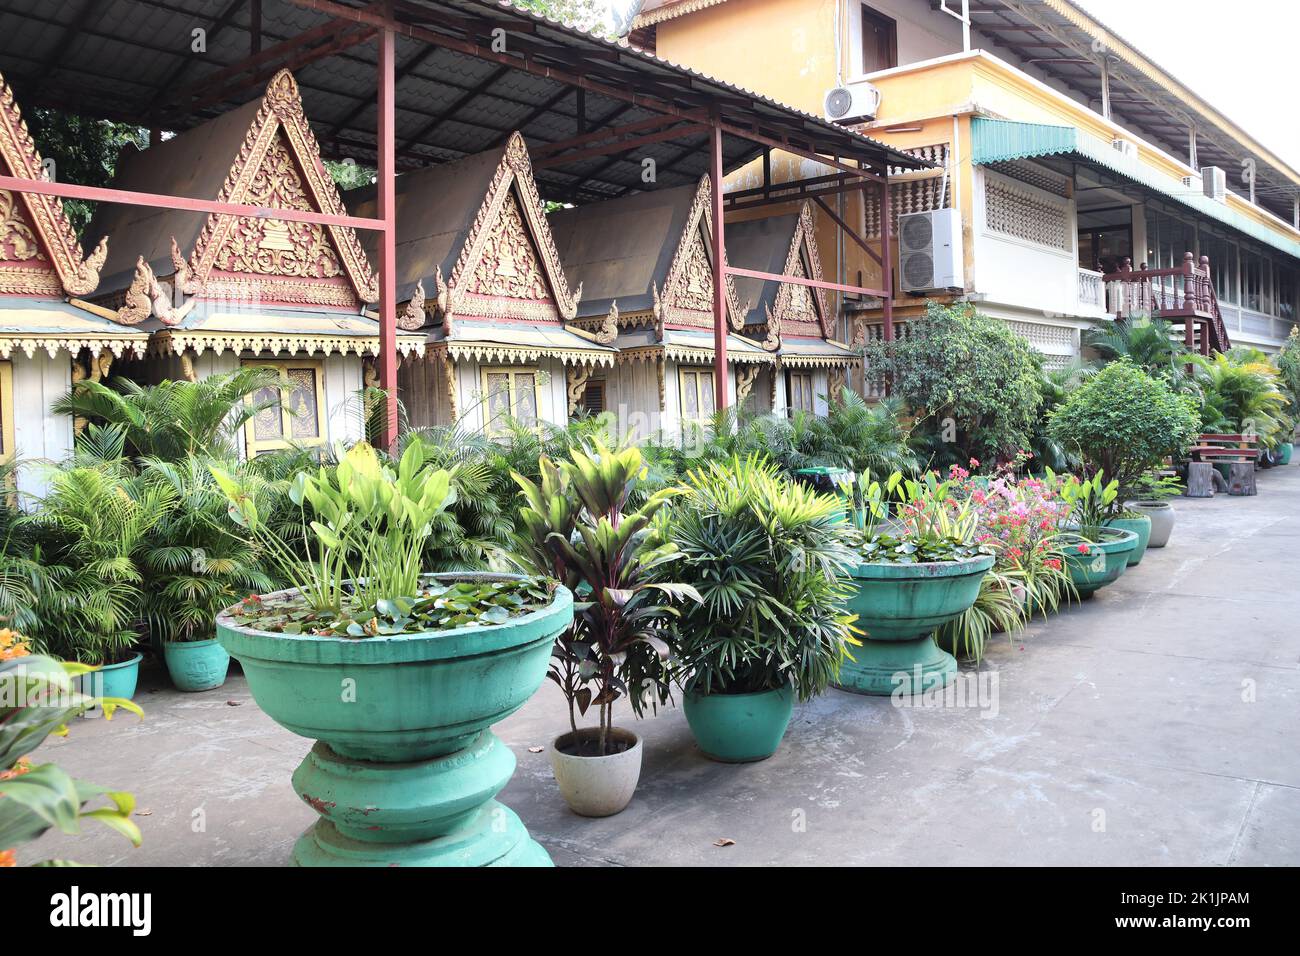 Decorative pavilion and tropical plants in clay pots, garden of Royal Palace complex, Phnom Penh, Cambodia Stock Photo